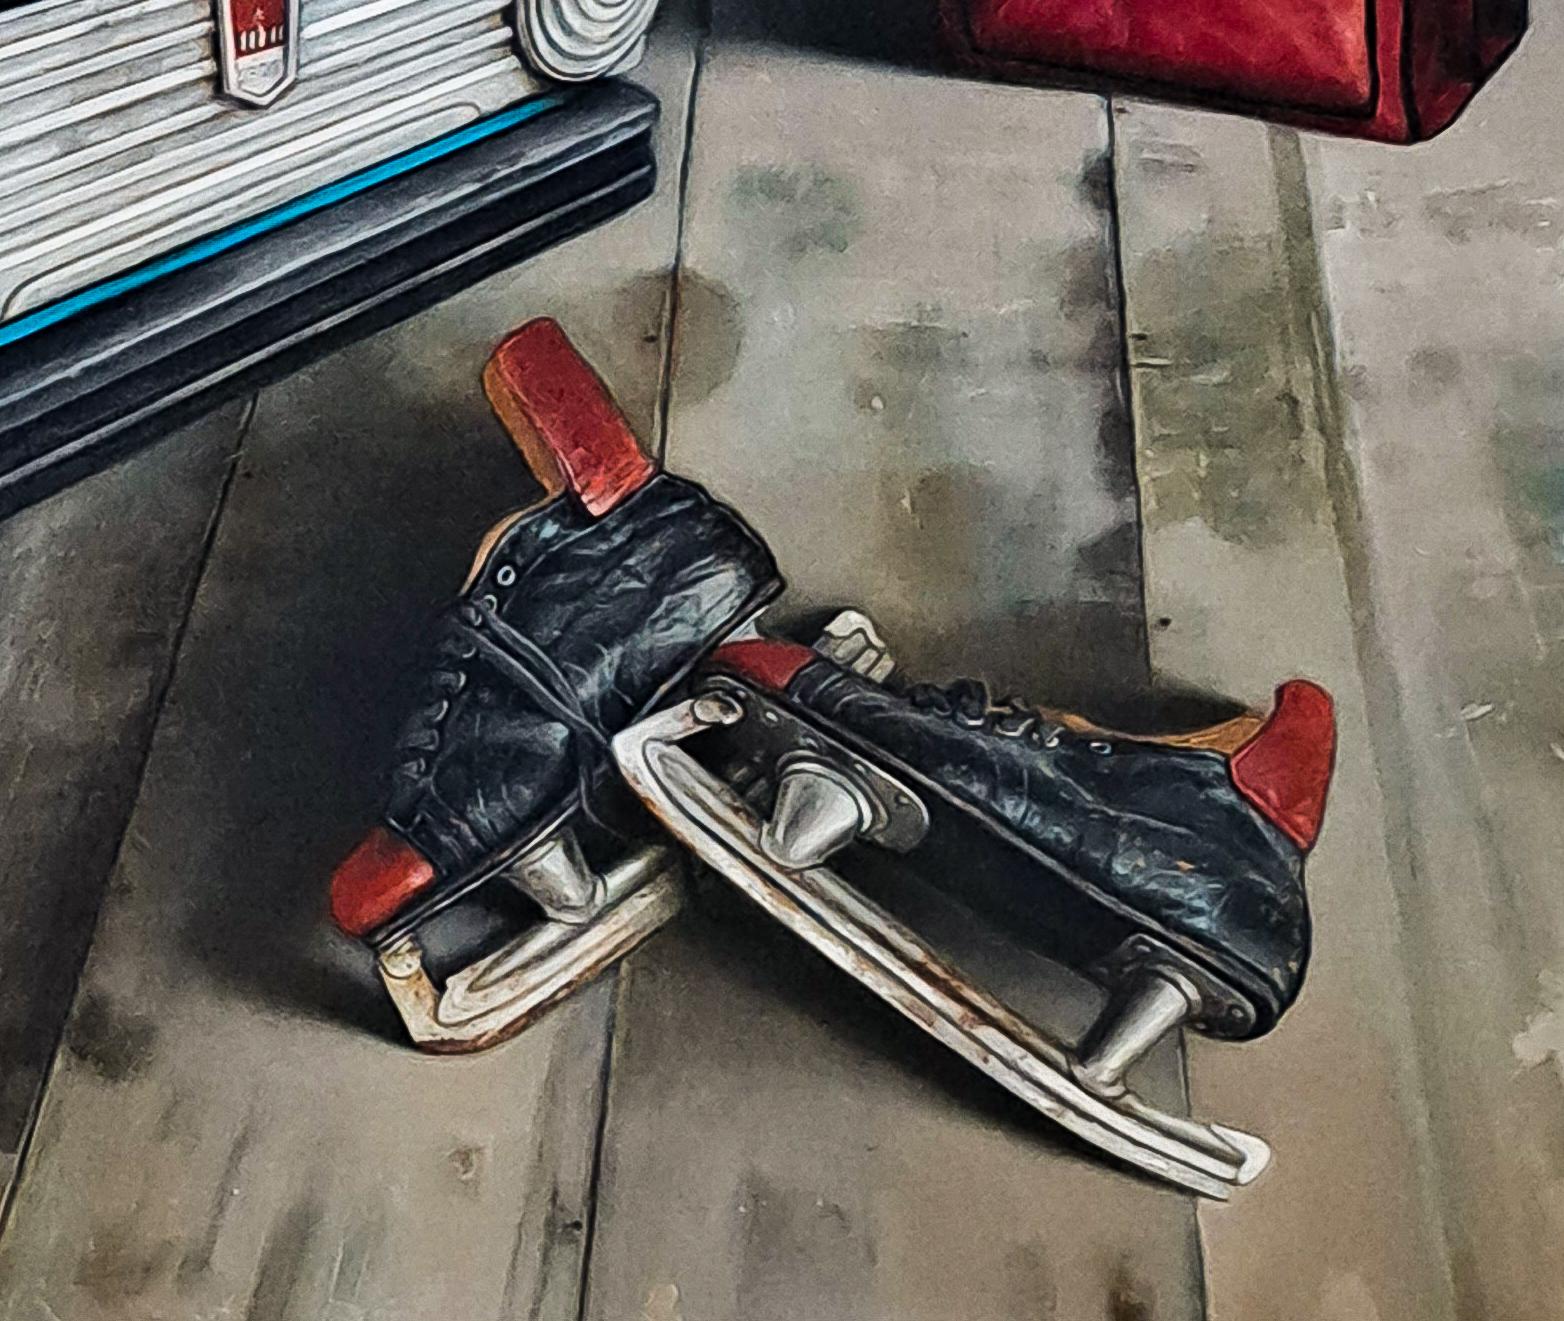 Pedal Car and Skates - realist, interior, Ukrainian, Israeli, oil on canvas - Painting by Dmitry Yuzefovich